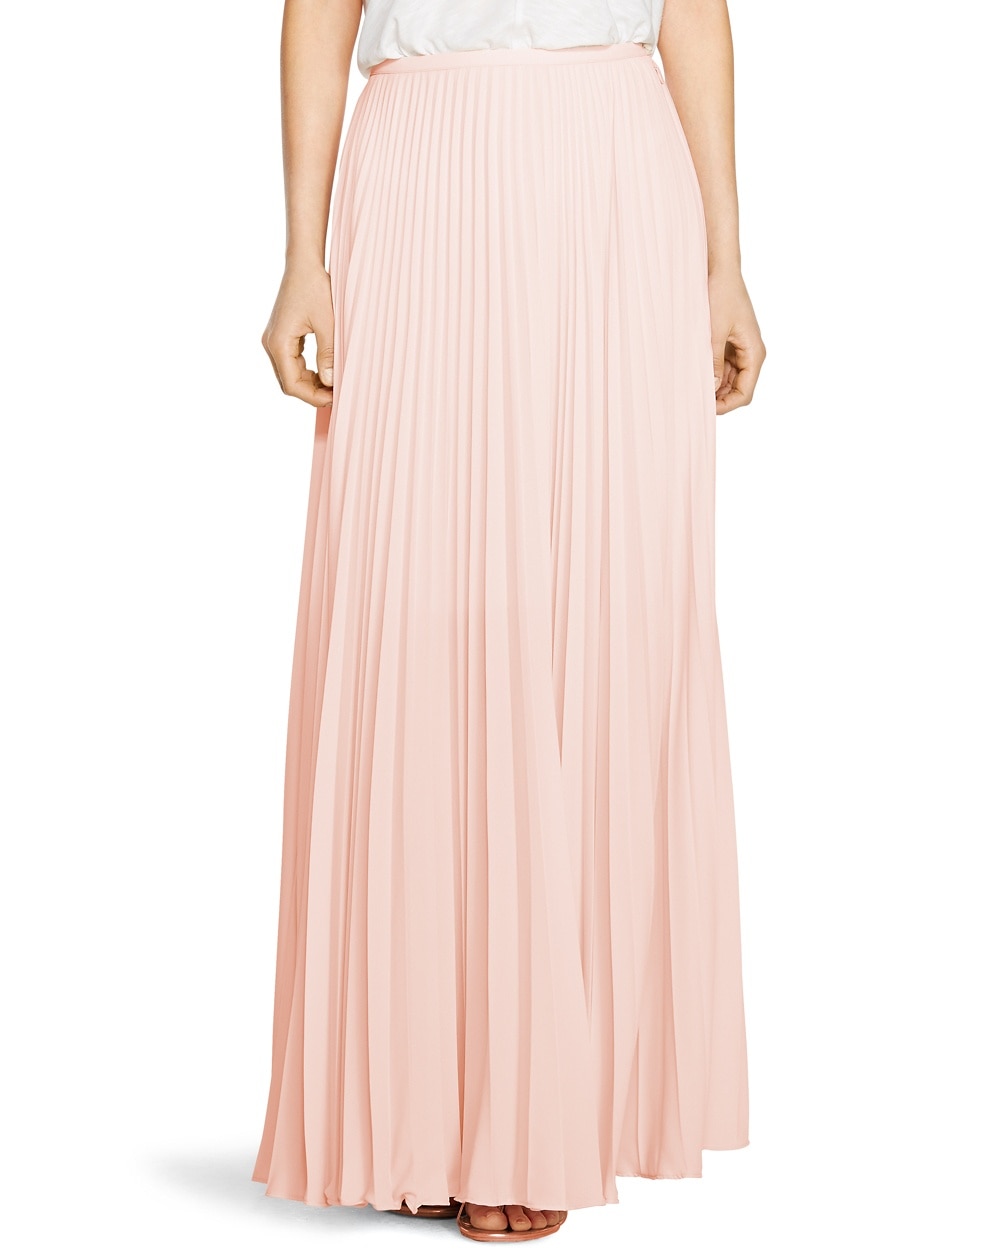 Pleated Maxi Skirt video preview image, click to start video